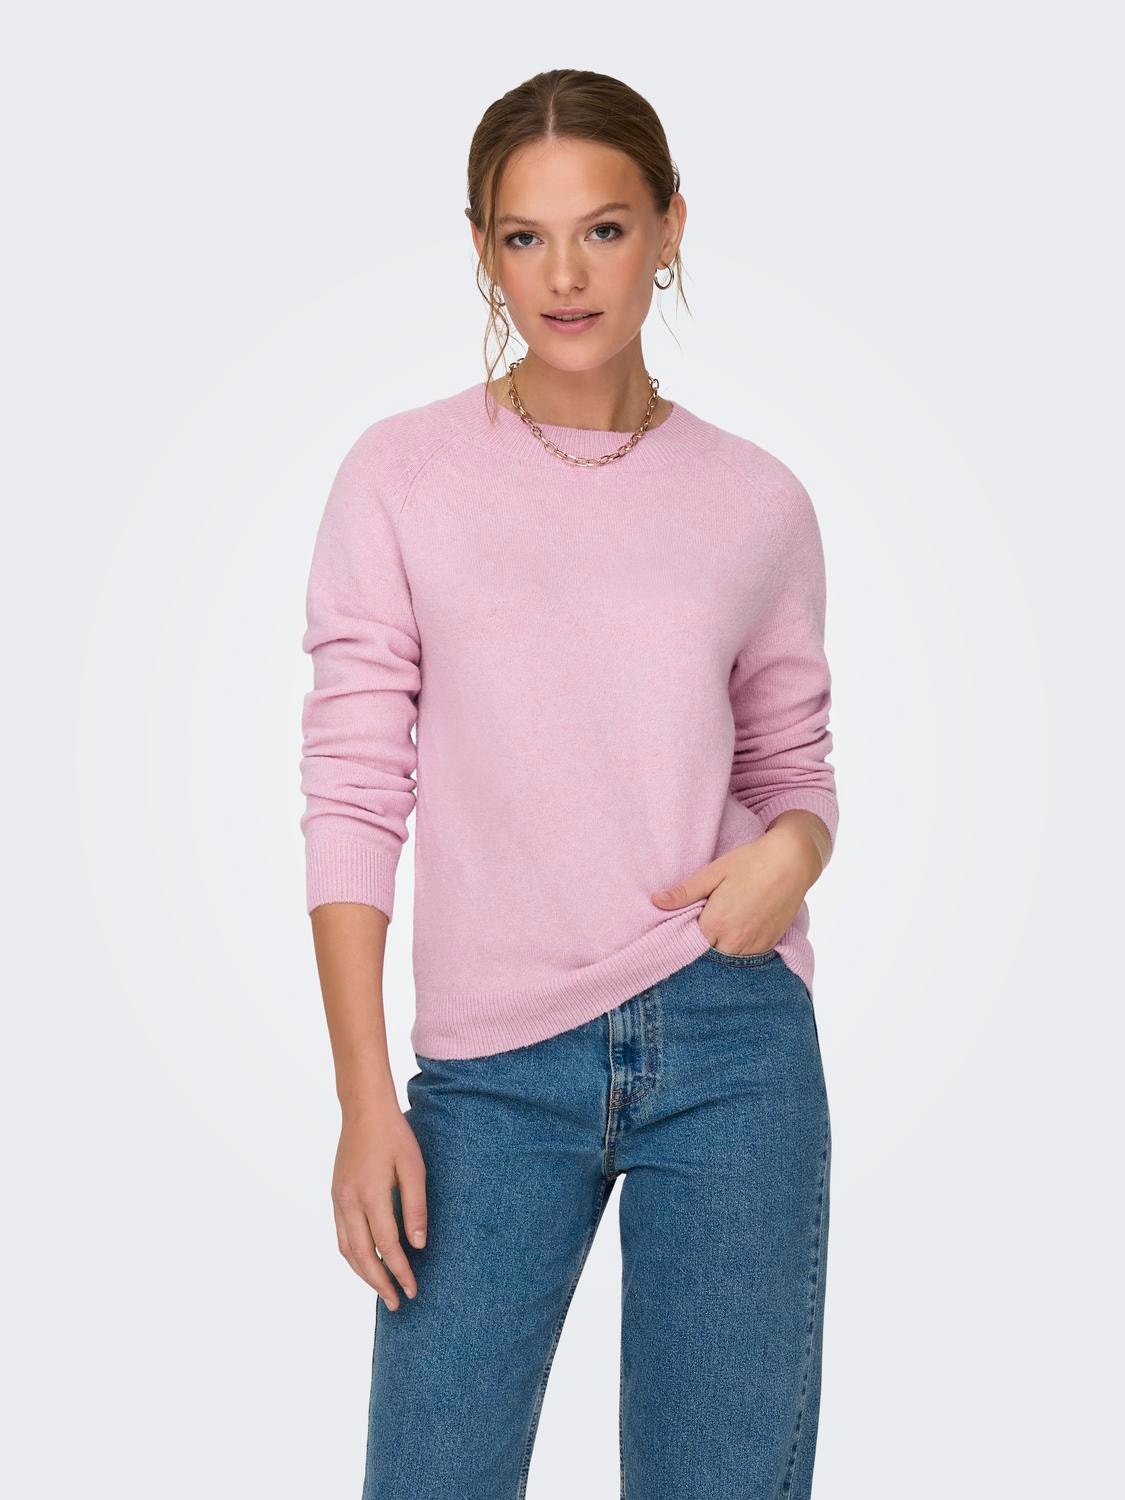 ONLY o-neck knitted pullover -Pastel Lavender - 15204279